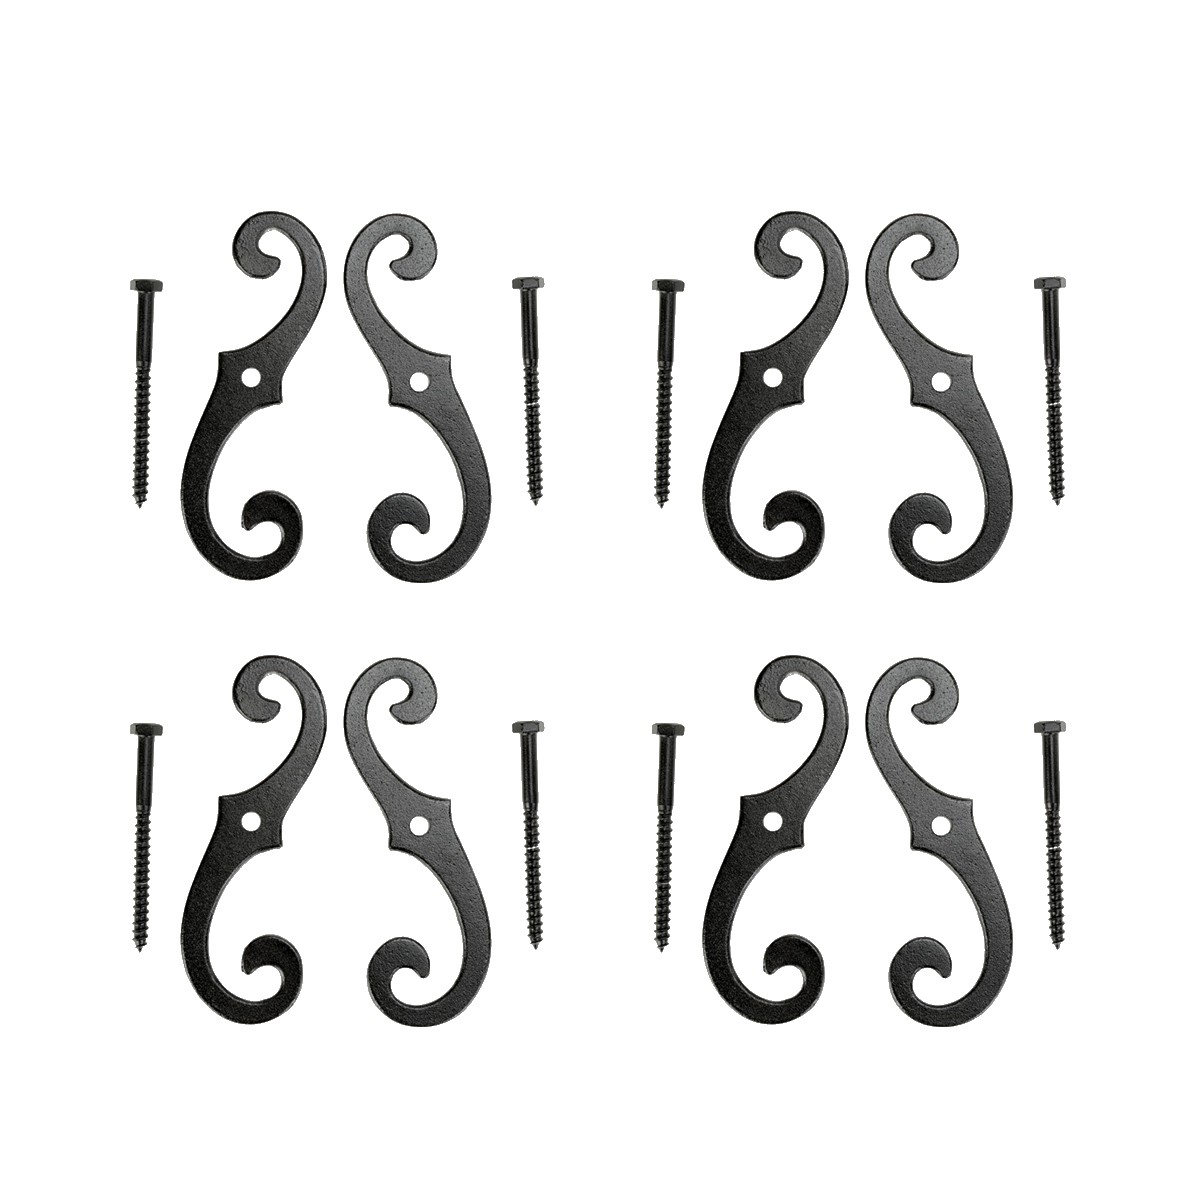 Renovators Supply Pairs of Vintage Shutter Dogs S Shaped Shutter Hardware in Black Pack of 4